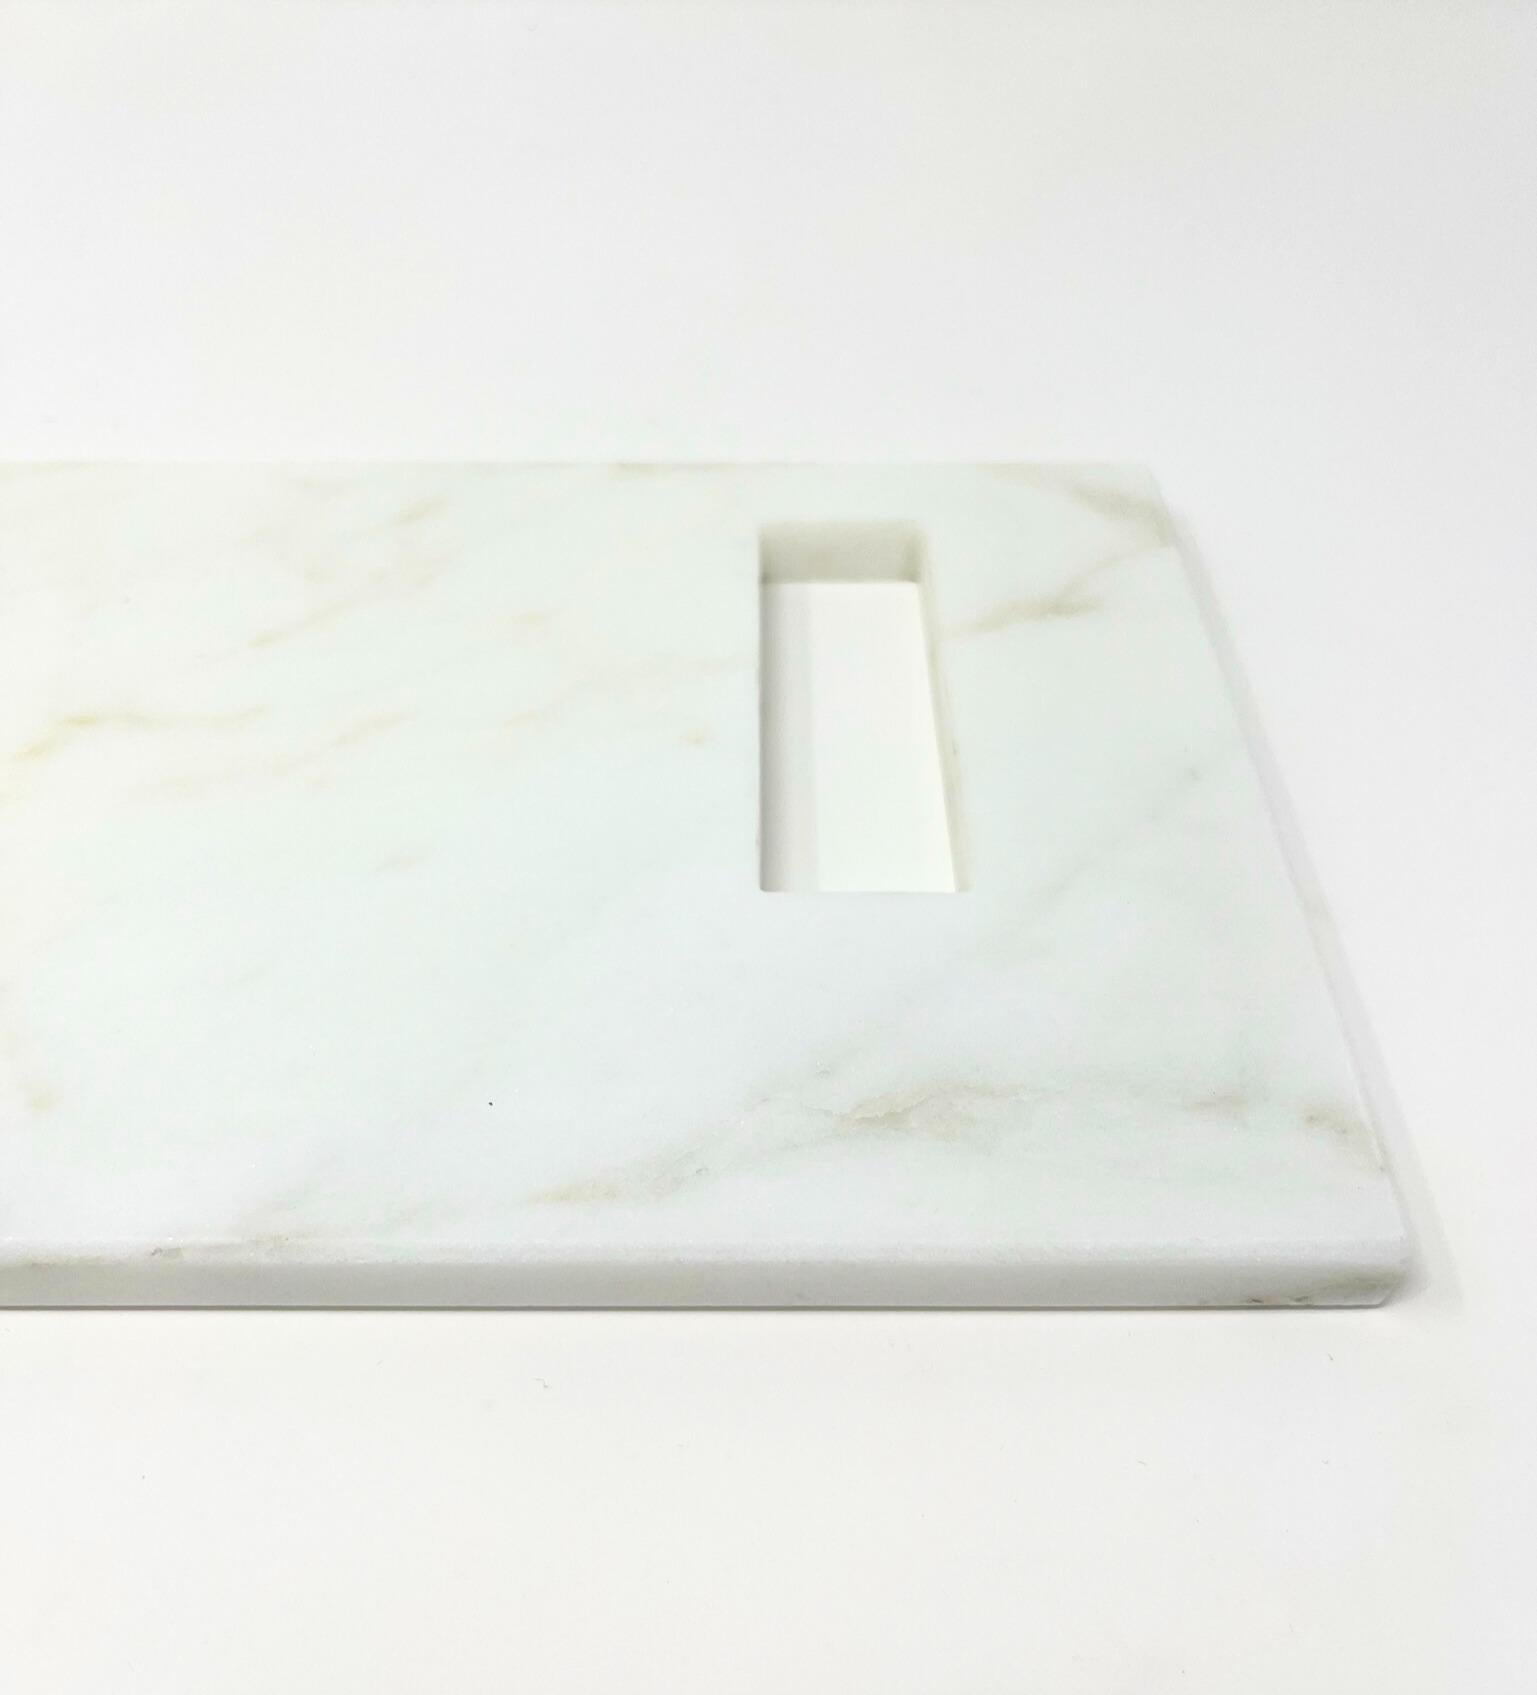 The Brass chopping board, entirely made of marble, is an exclusive chopping board with a rectangular handle in Calacatta Gold embellished with a brass tab on one end, giving it a further touch of refined style.

 The Brass chopping board is part of